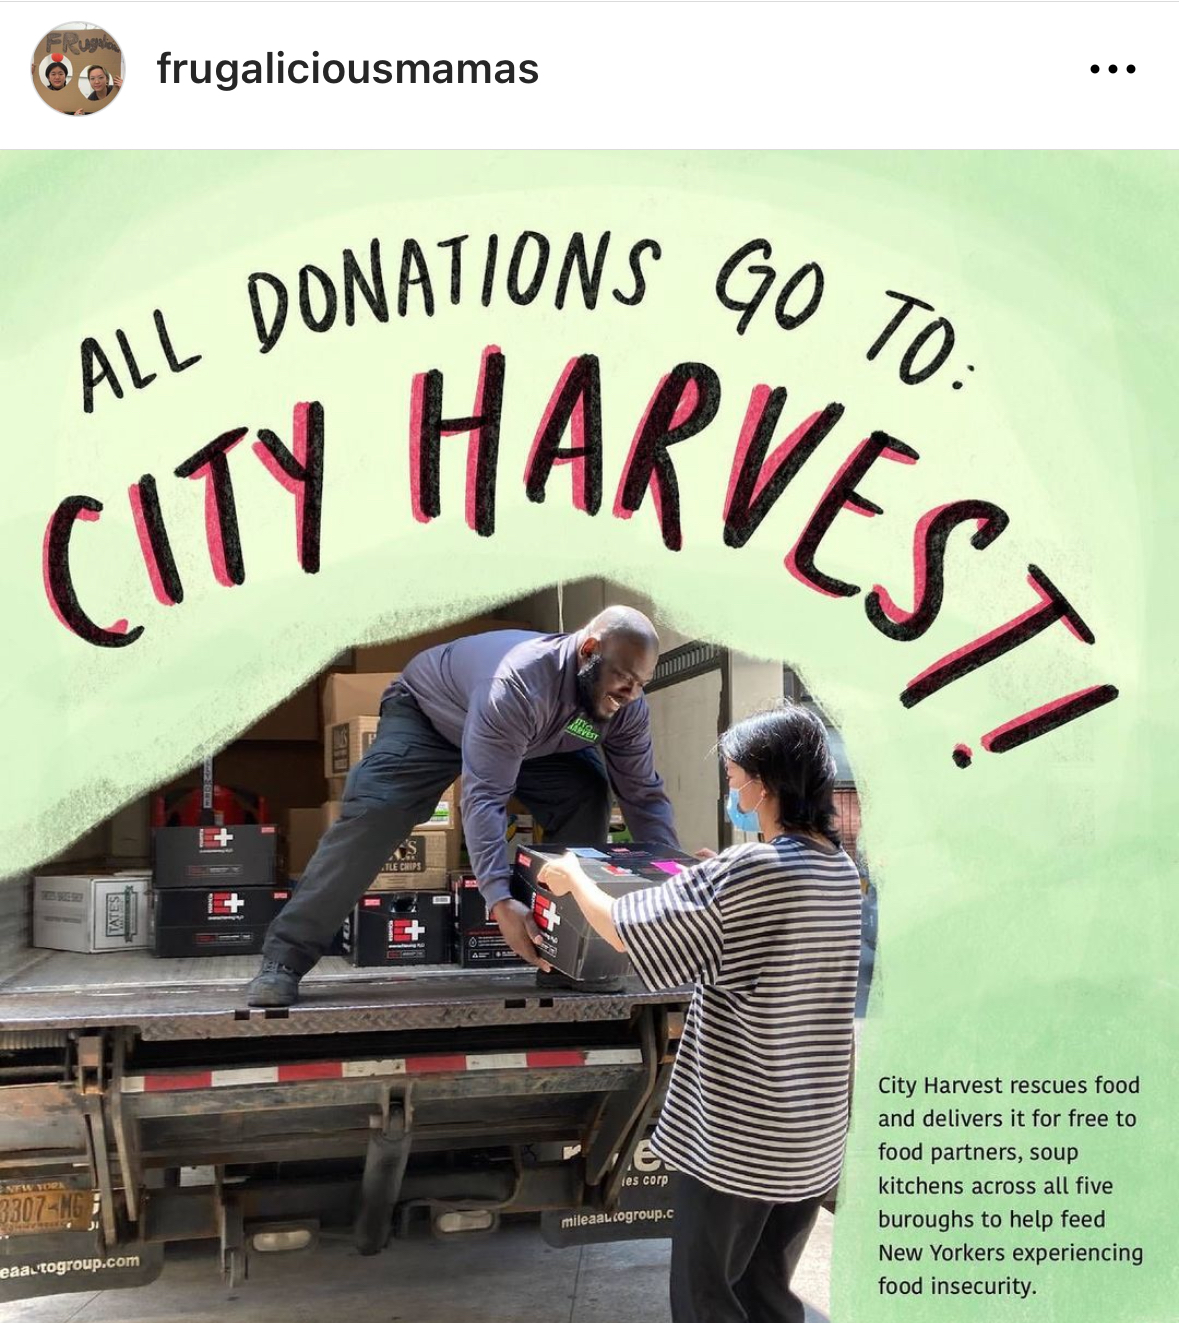 Photo from Frugalicous Mamas instagram that says “All donations go to City Harvest!” with a photo of Angie Li assisting with loading into the City Harvest food transfer truck.